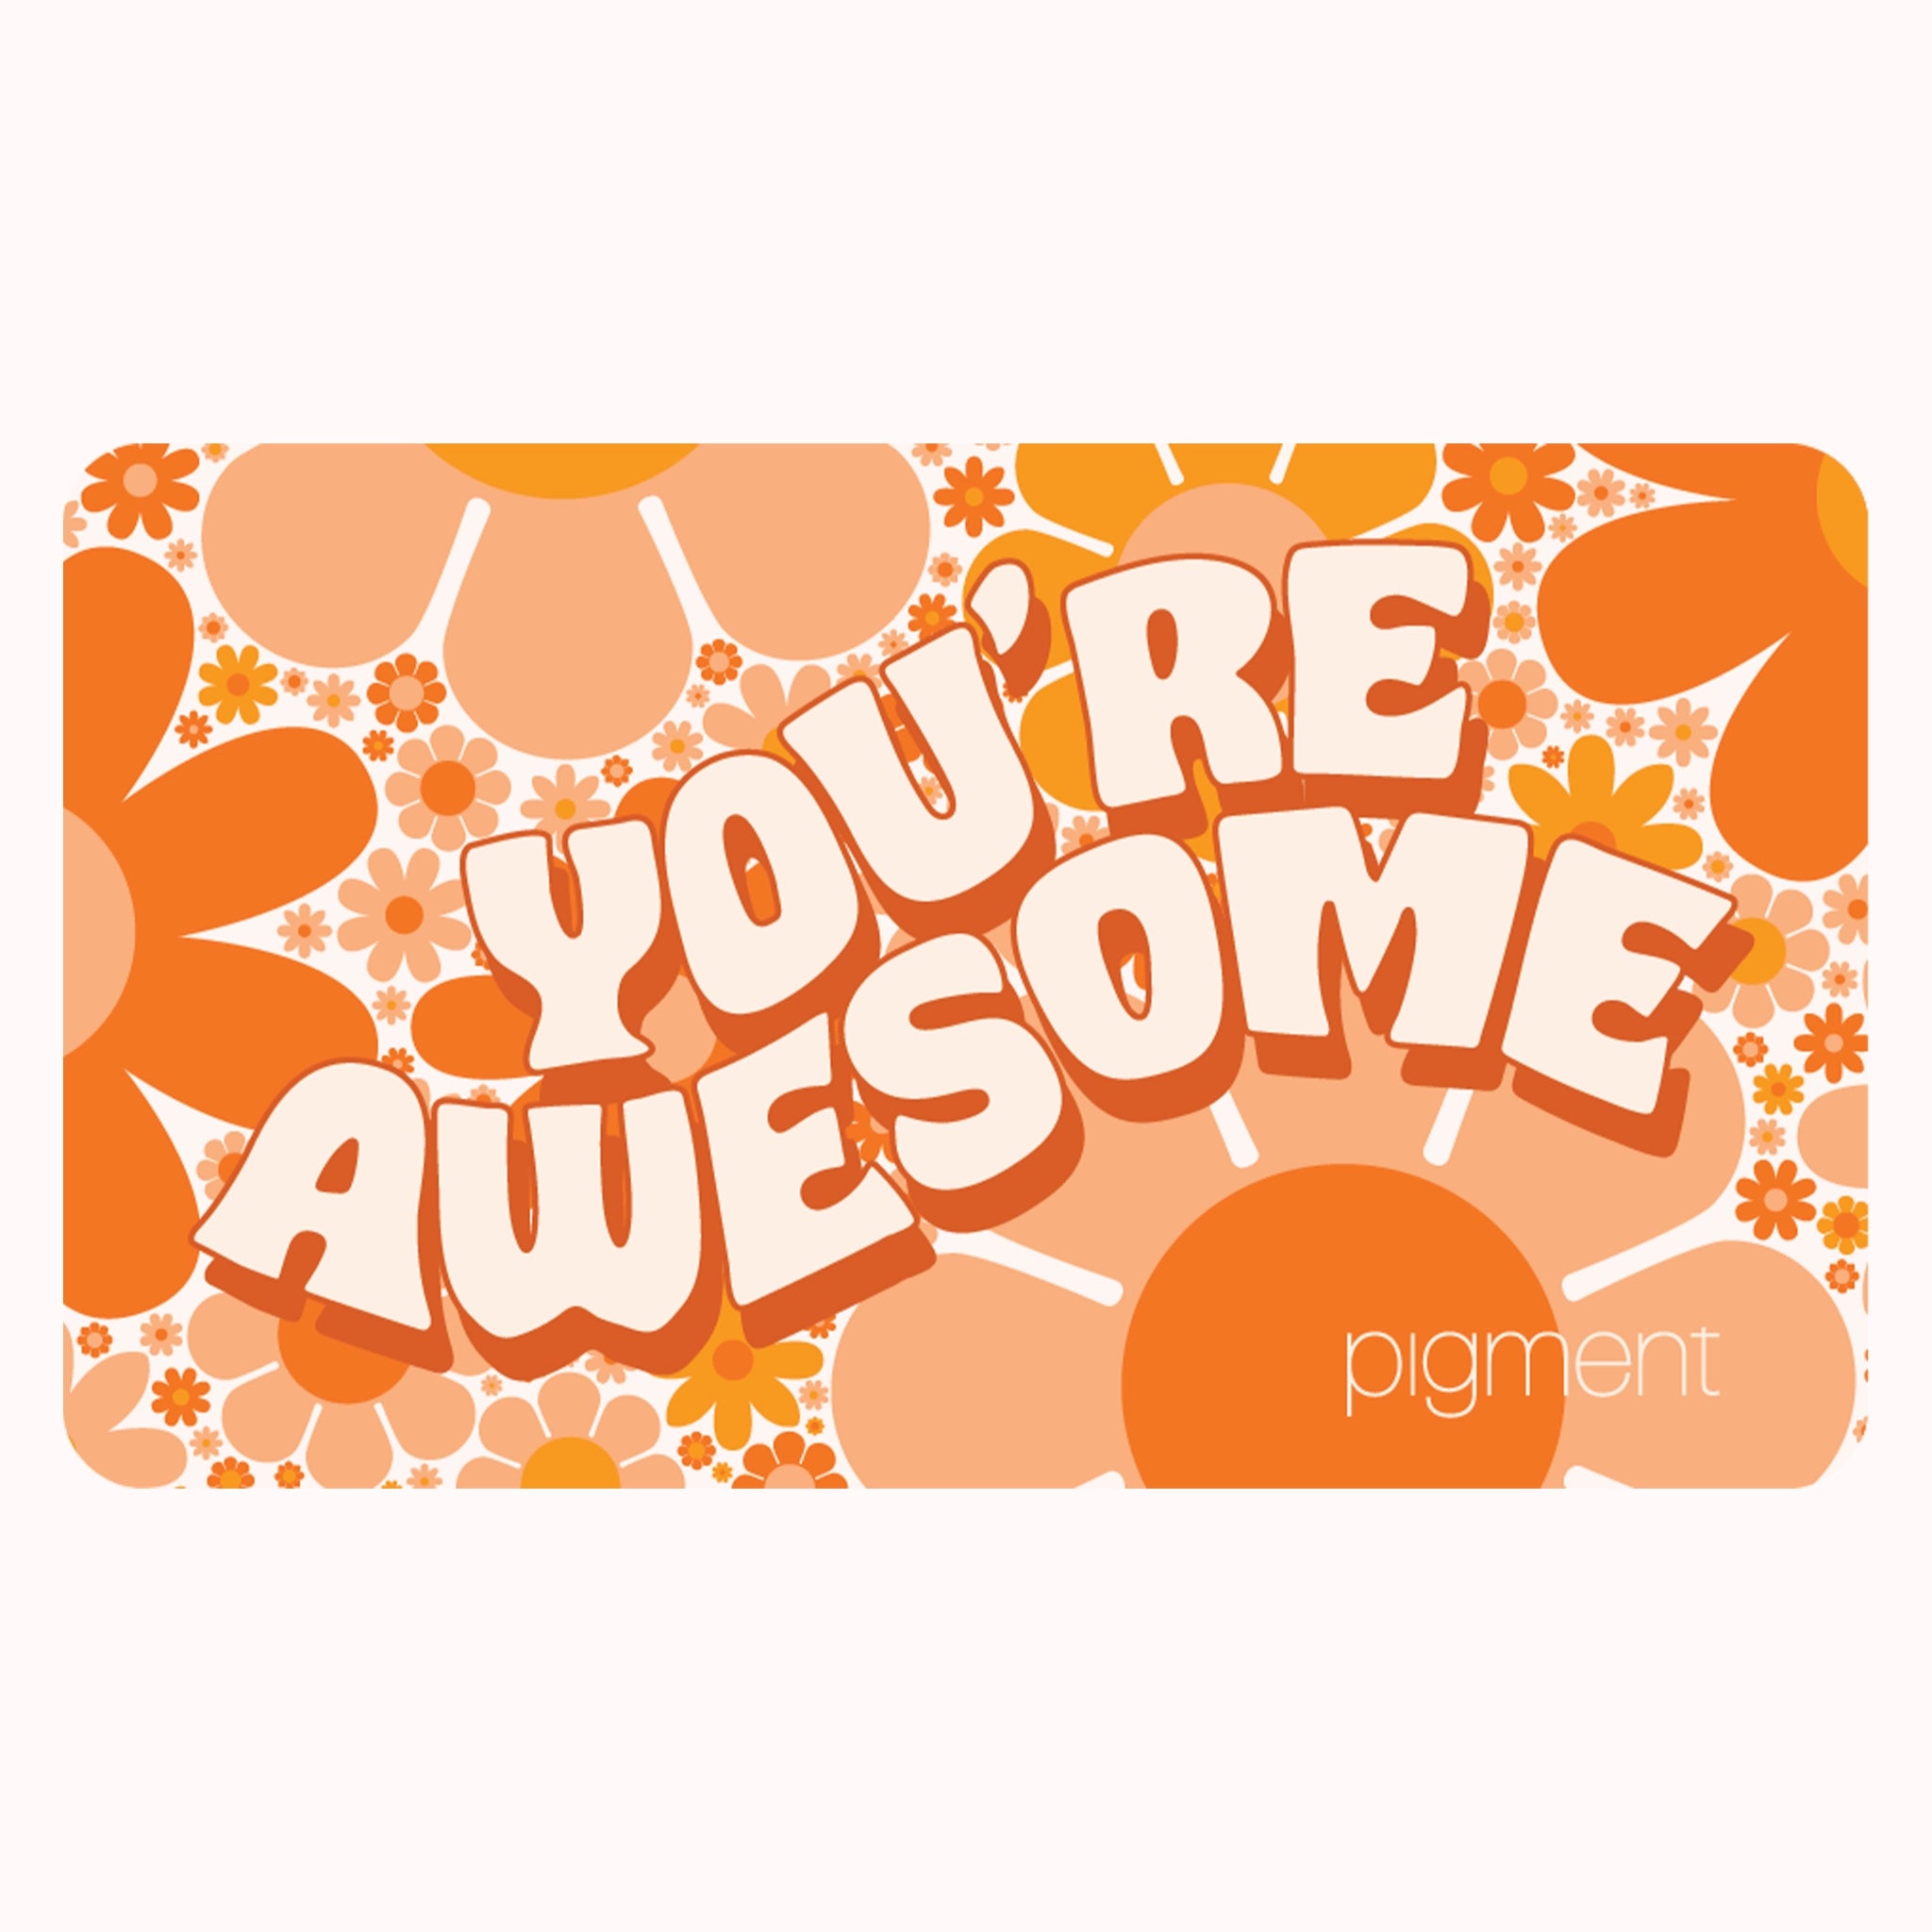 On a white background is an orange daisy print gift card with white text in the center that reads, "You're Awesome".